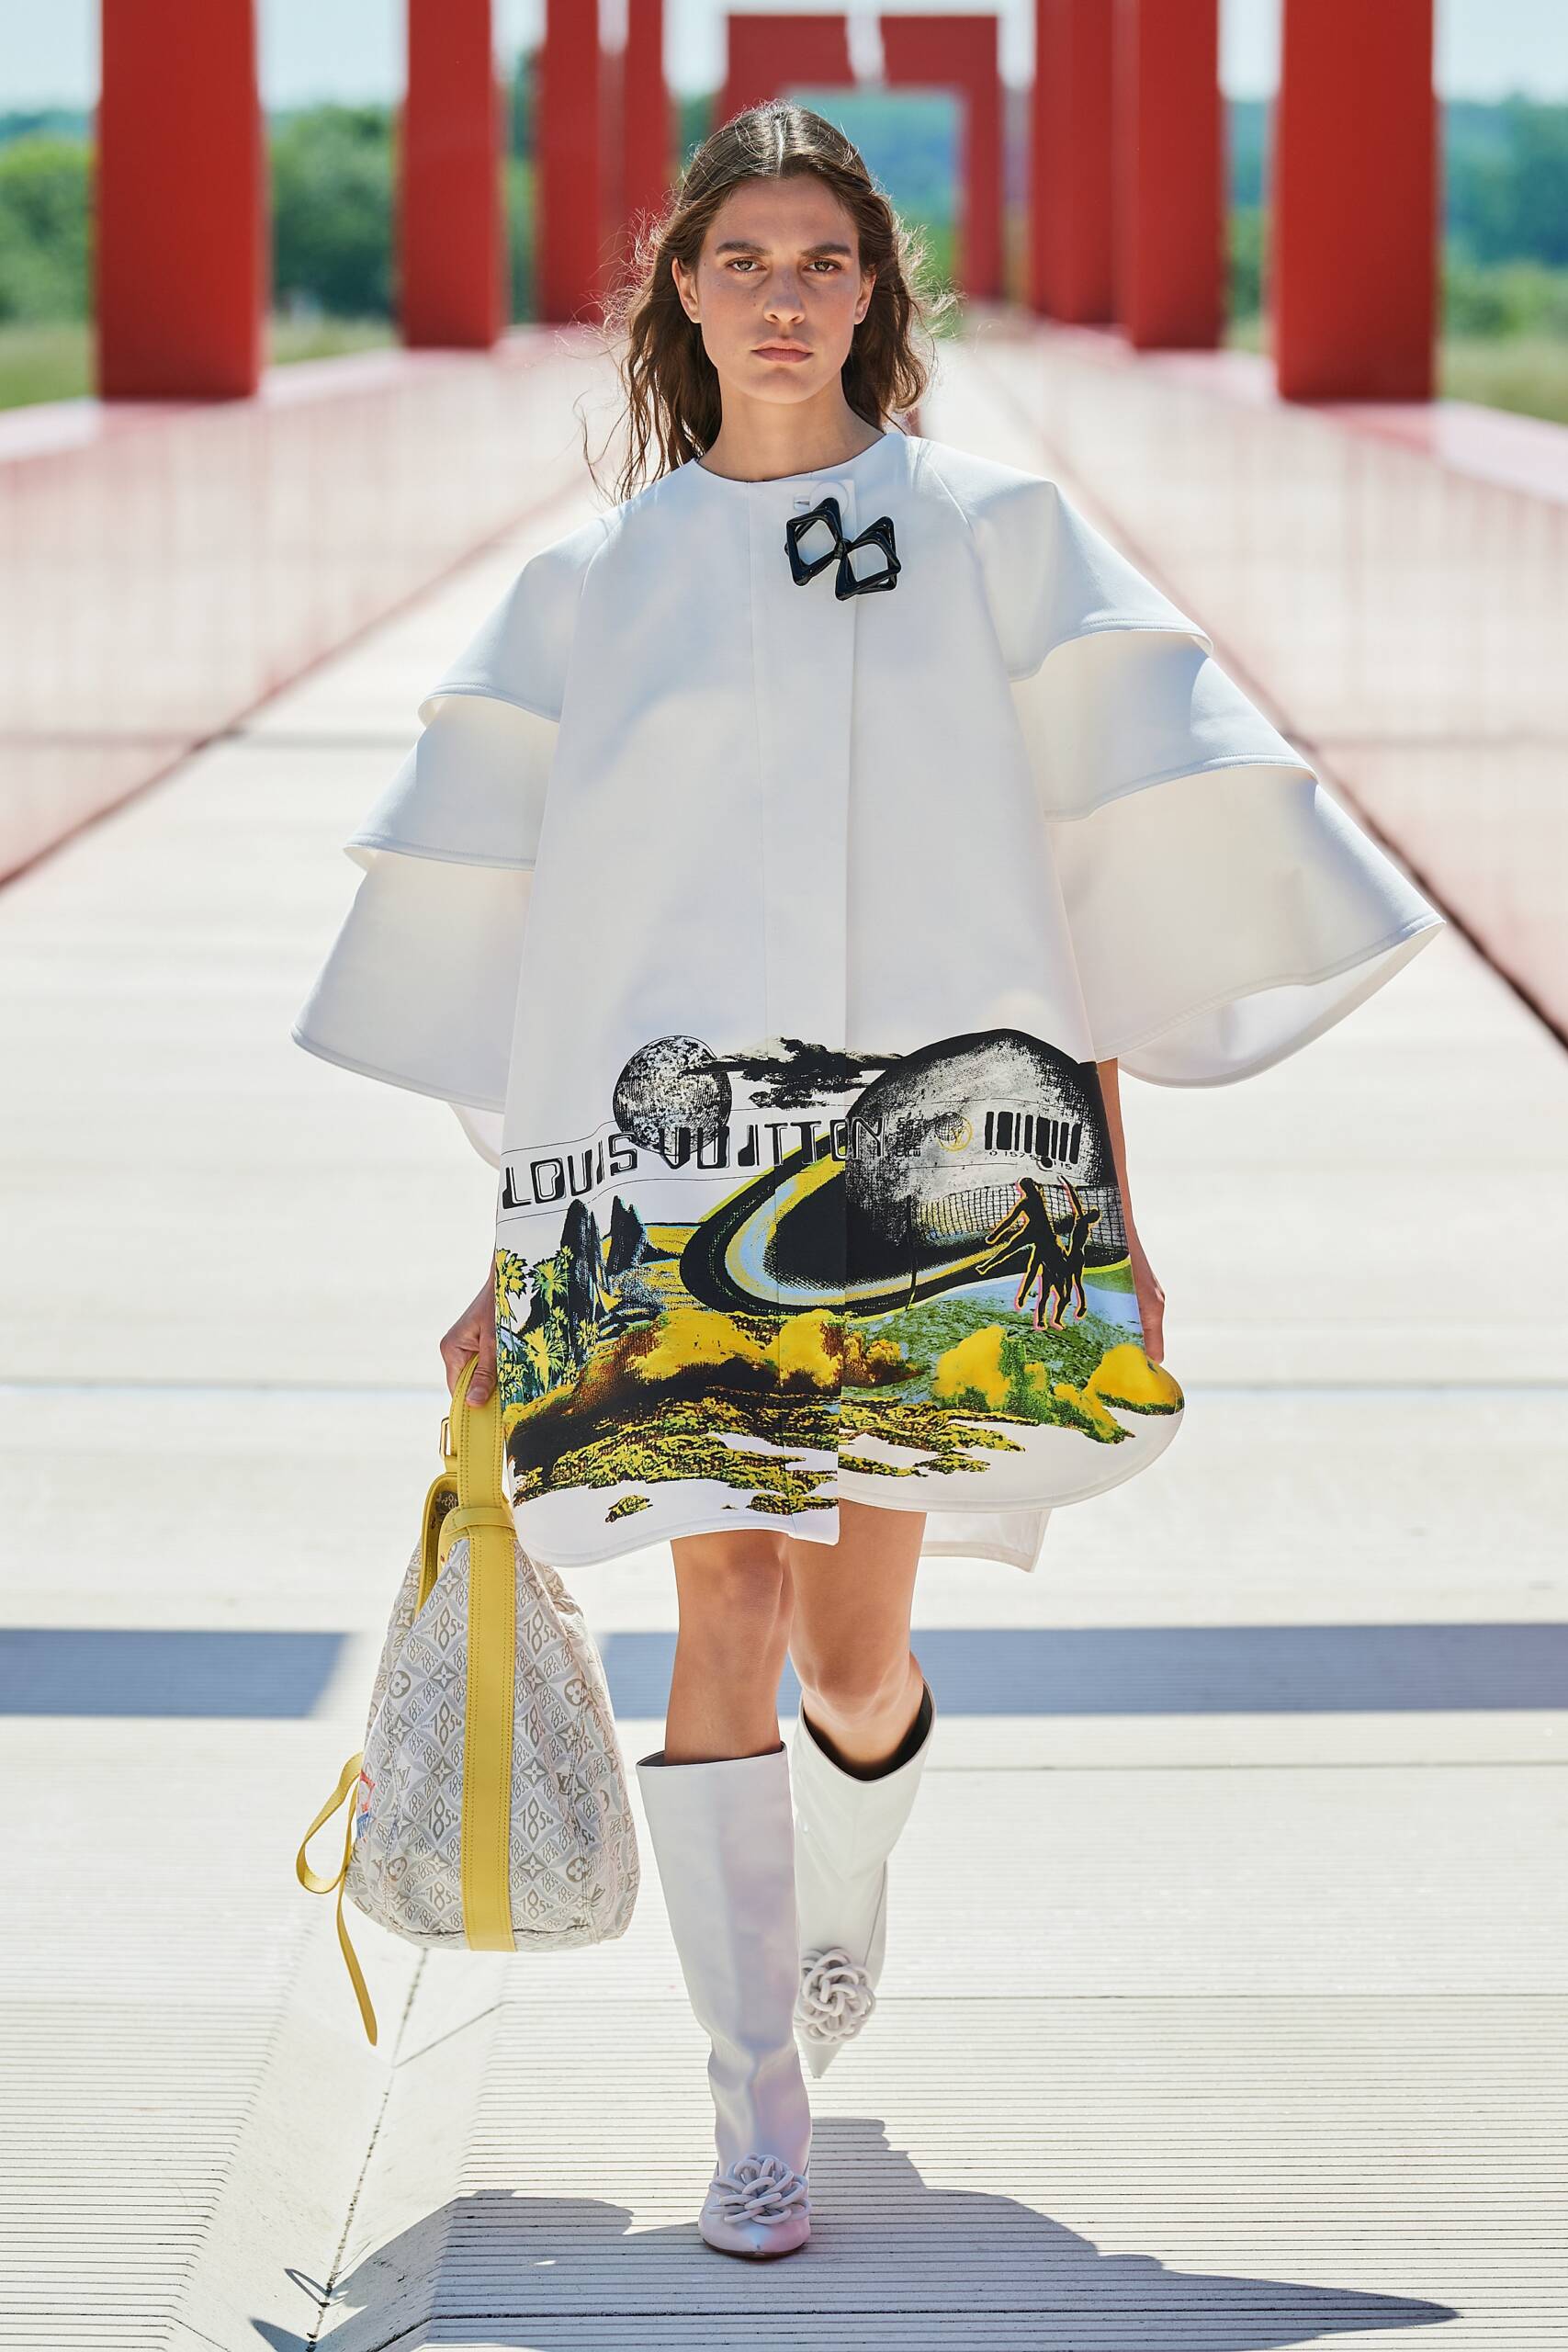 Out of this world: Louis Vuitton's cruise 2022 collection was a